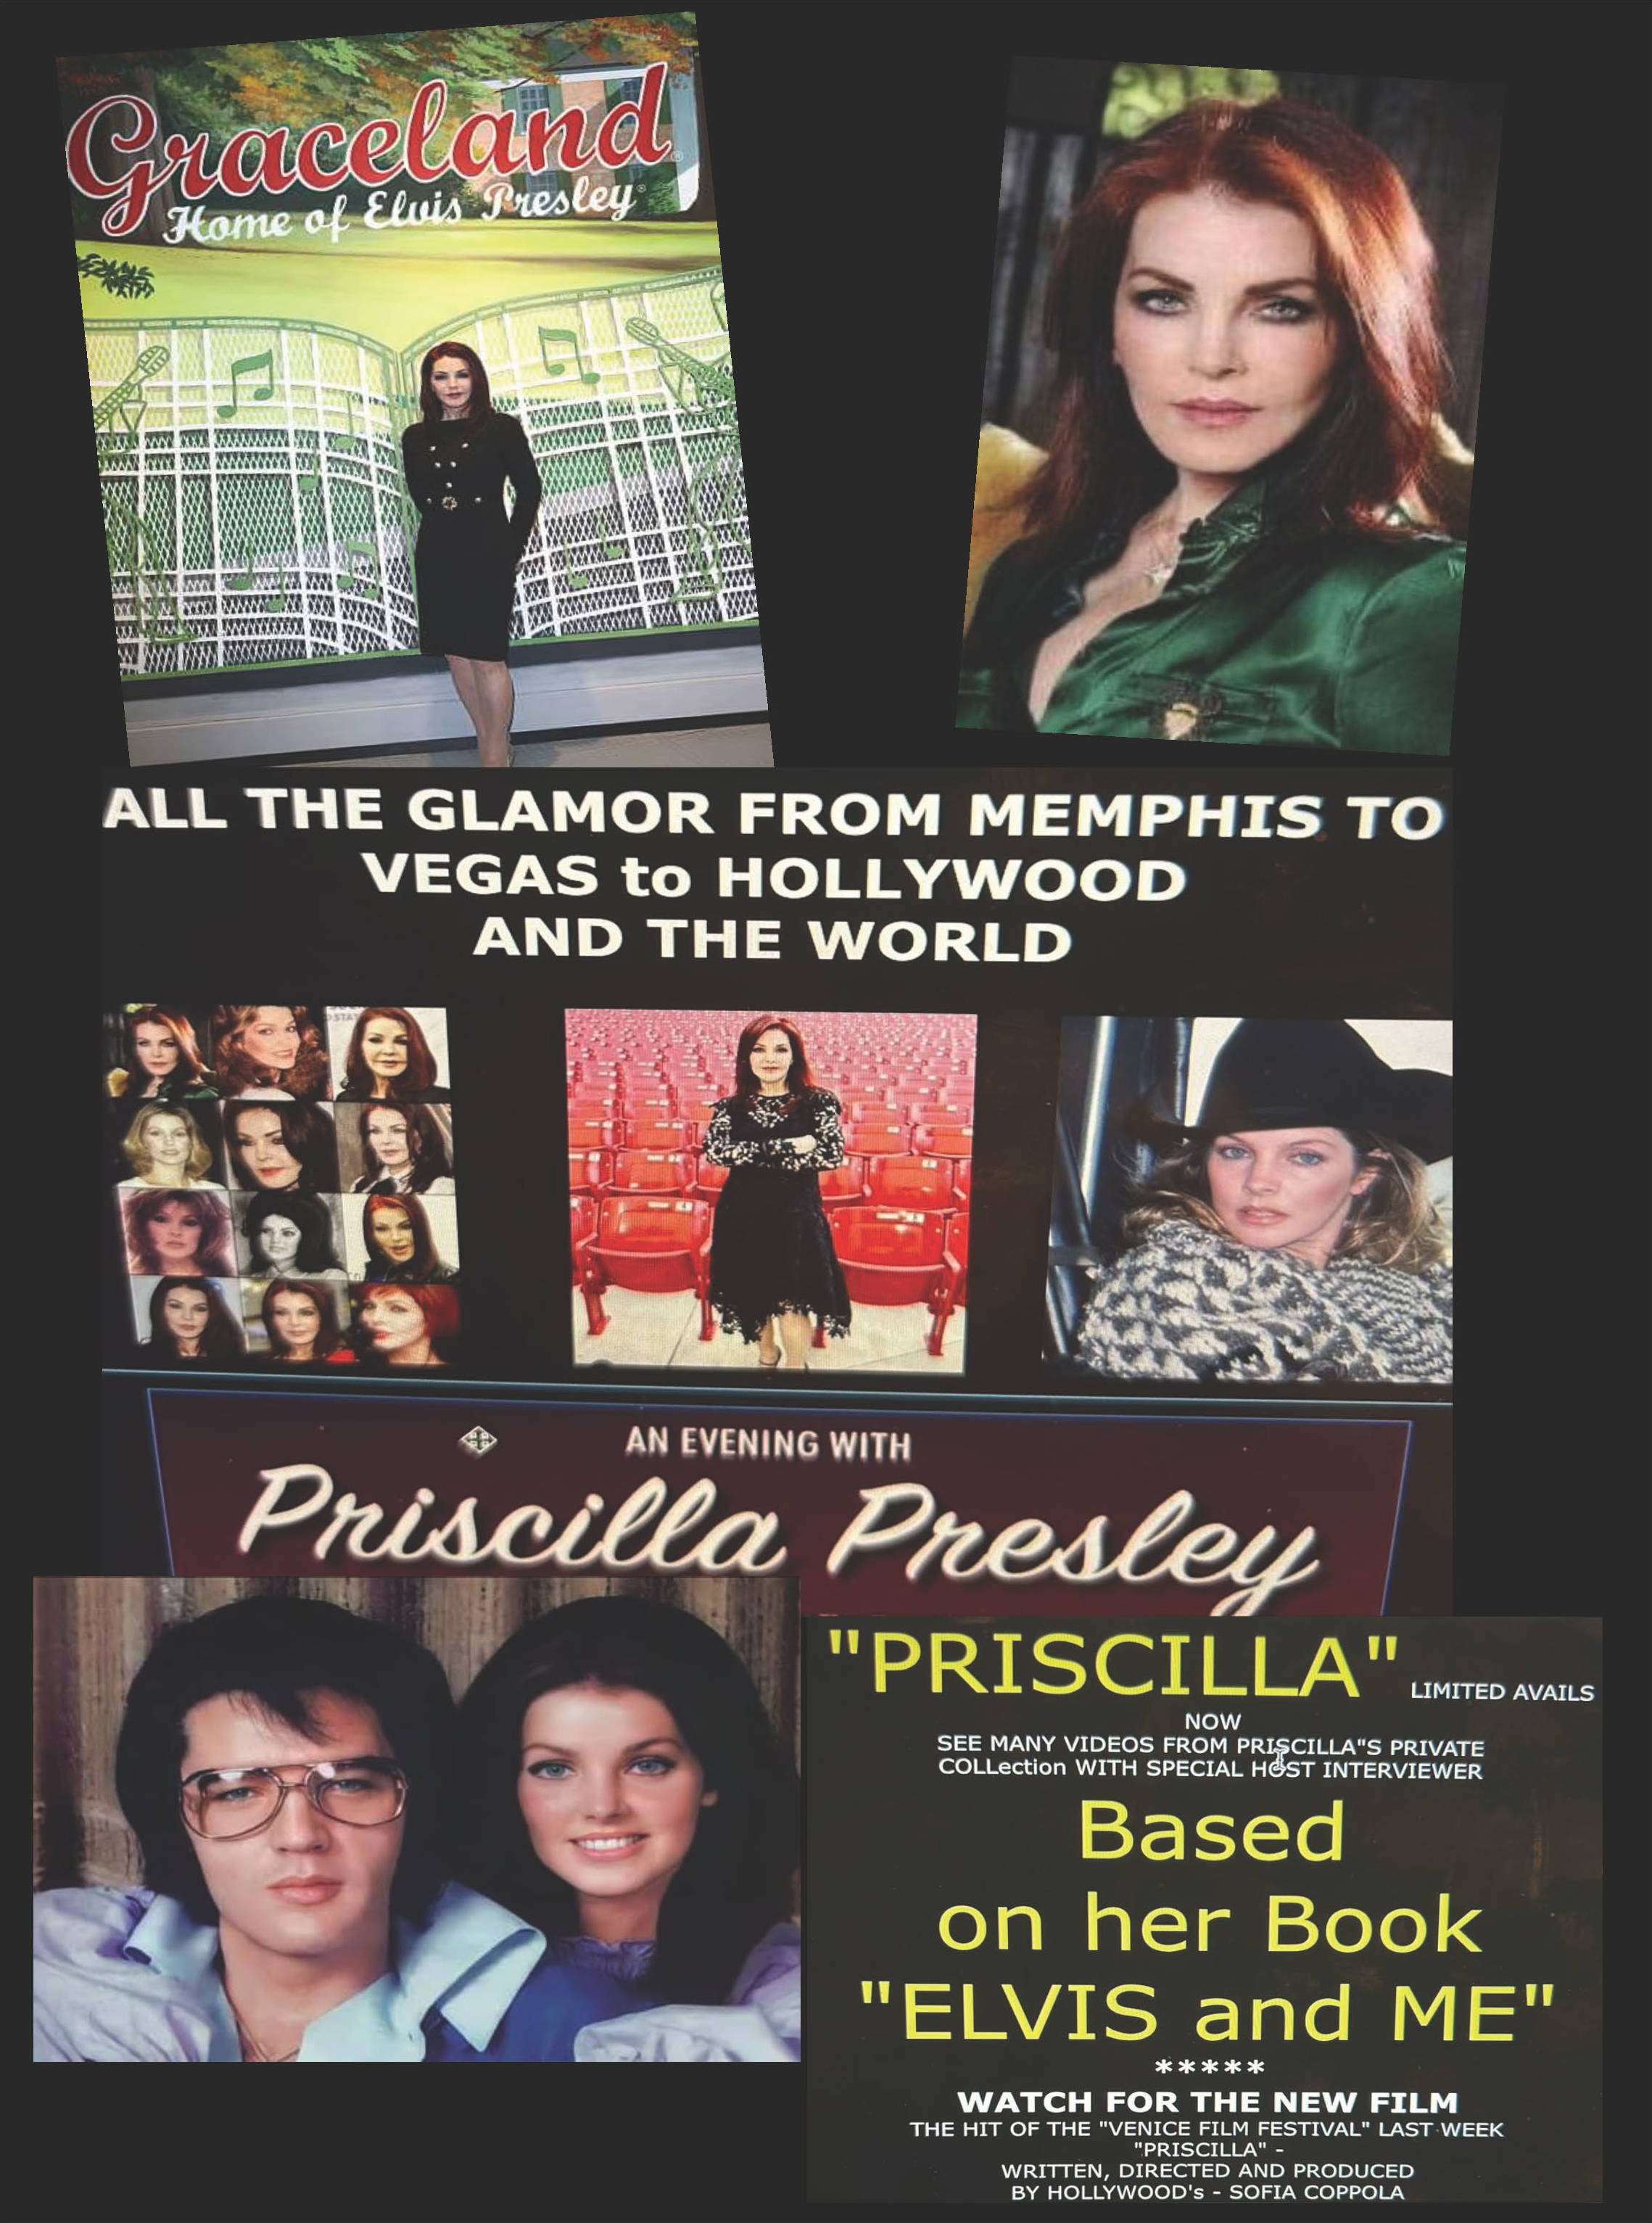 An evening with Priscilla Presley based on her book Elvis and Me